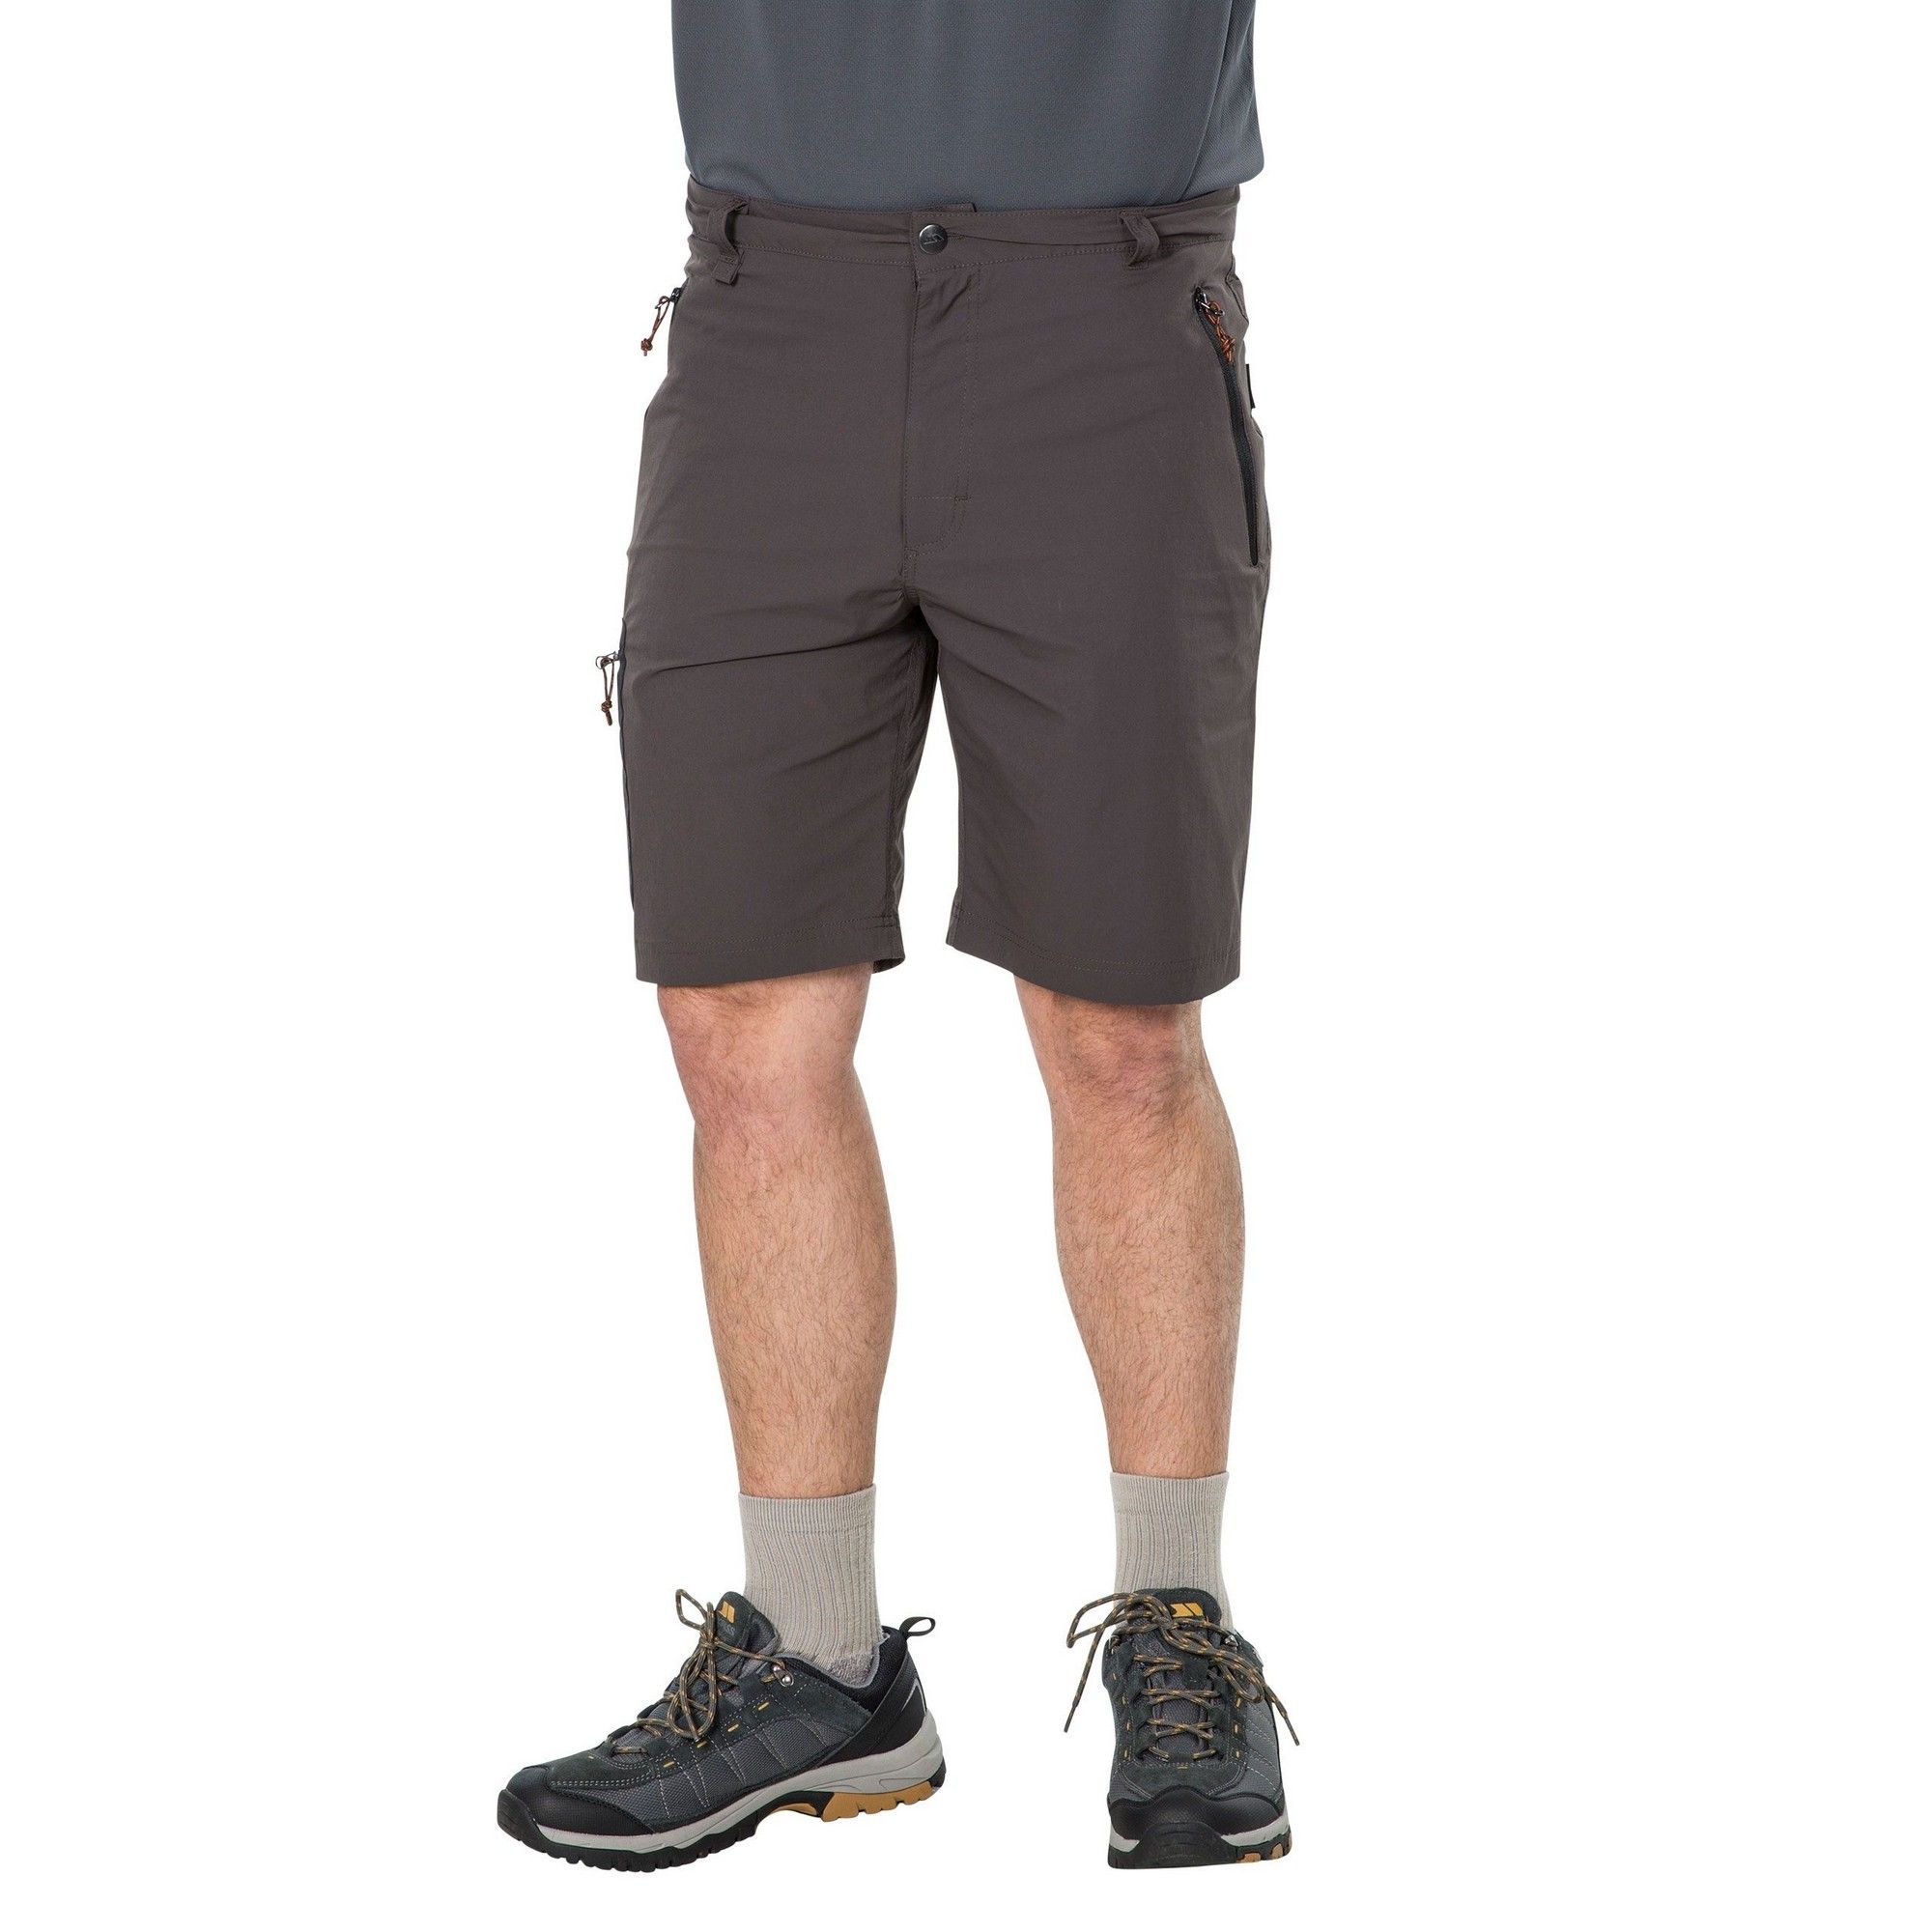 Flat waist with belt loops. 2 zip side entry pockets. 1 rear concealed zip pocket. 1 lower leg zip patch pocket. Quick dry. Comfort stretch. UV 40+. 85% Polyester, 15% Elastane. Trespass Mens Waist Sizing (approx): S - 32in/81cm, M - 34in/86cm, L - 36in/91.5cm, XL - 38in/96.5cm, XXL - 40in/101.5cm, 3XL - 42in/106.5cm.